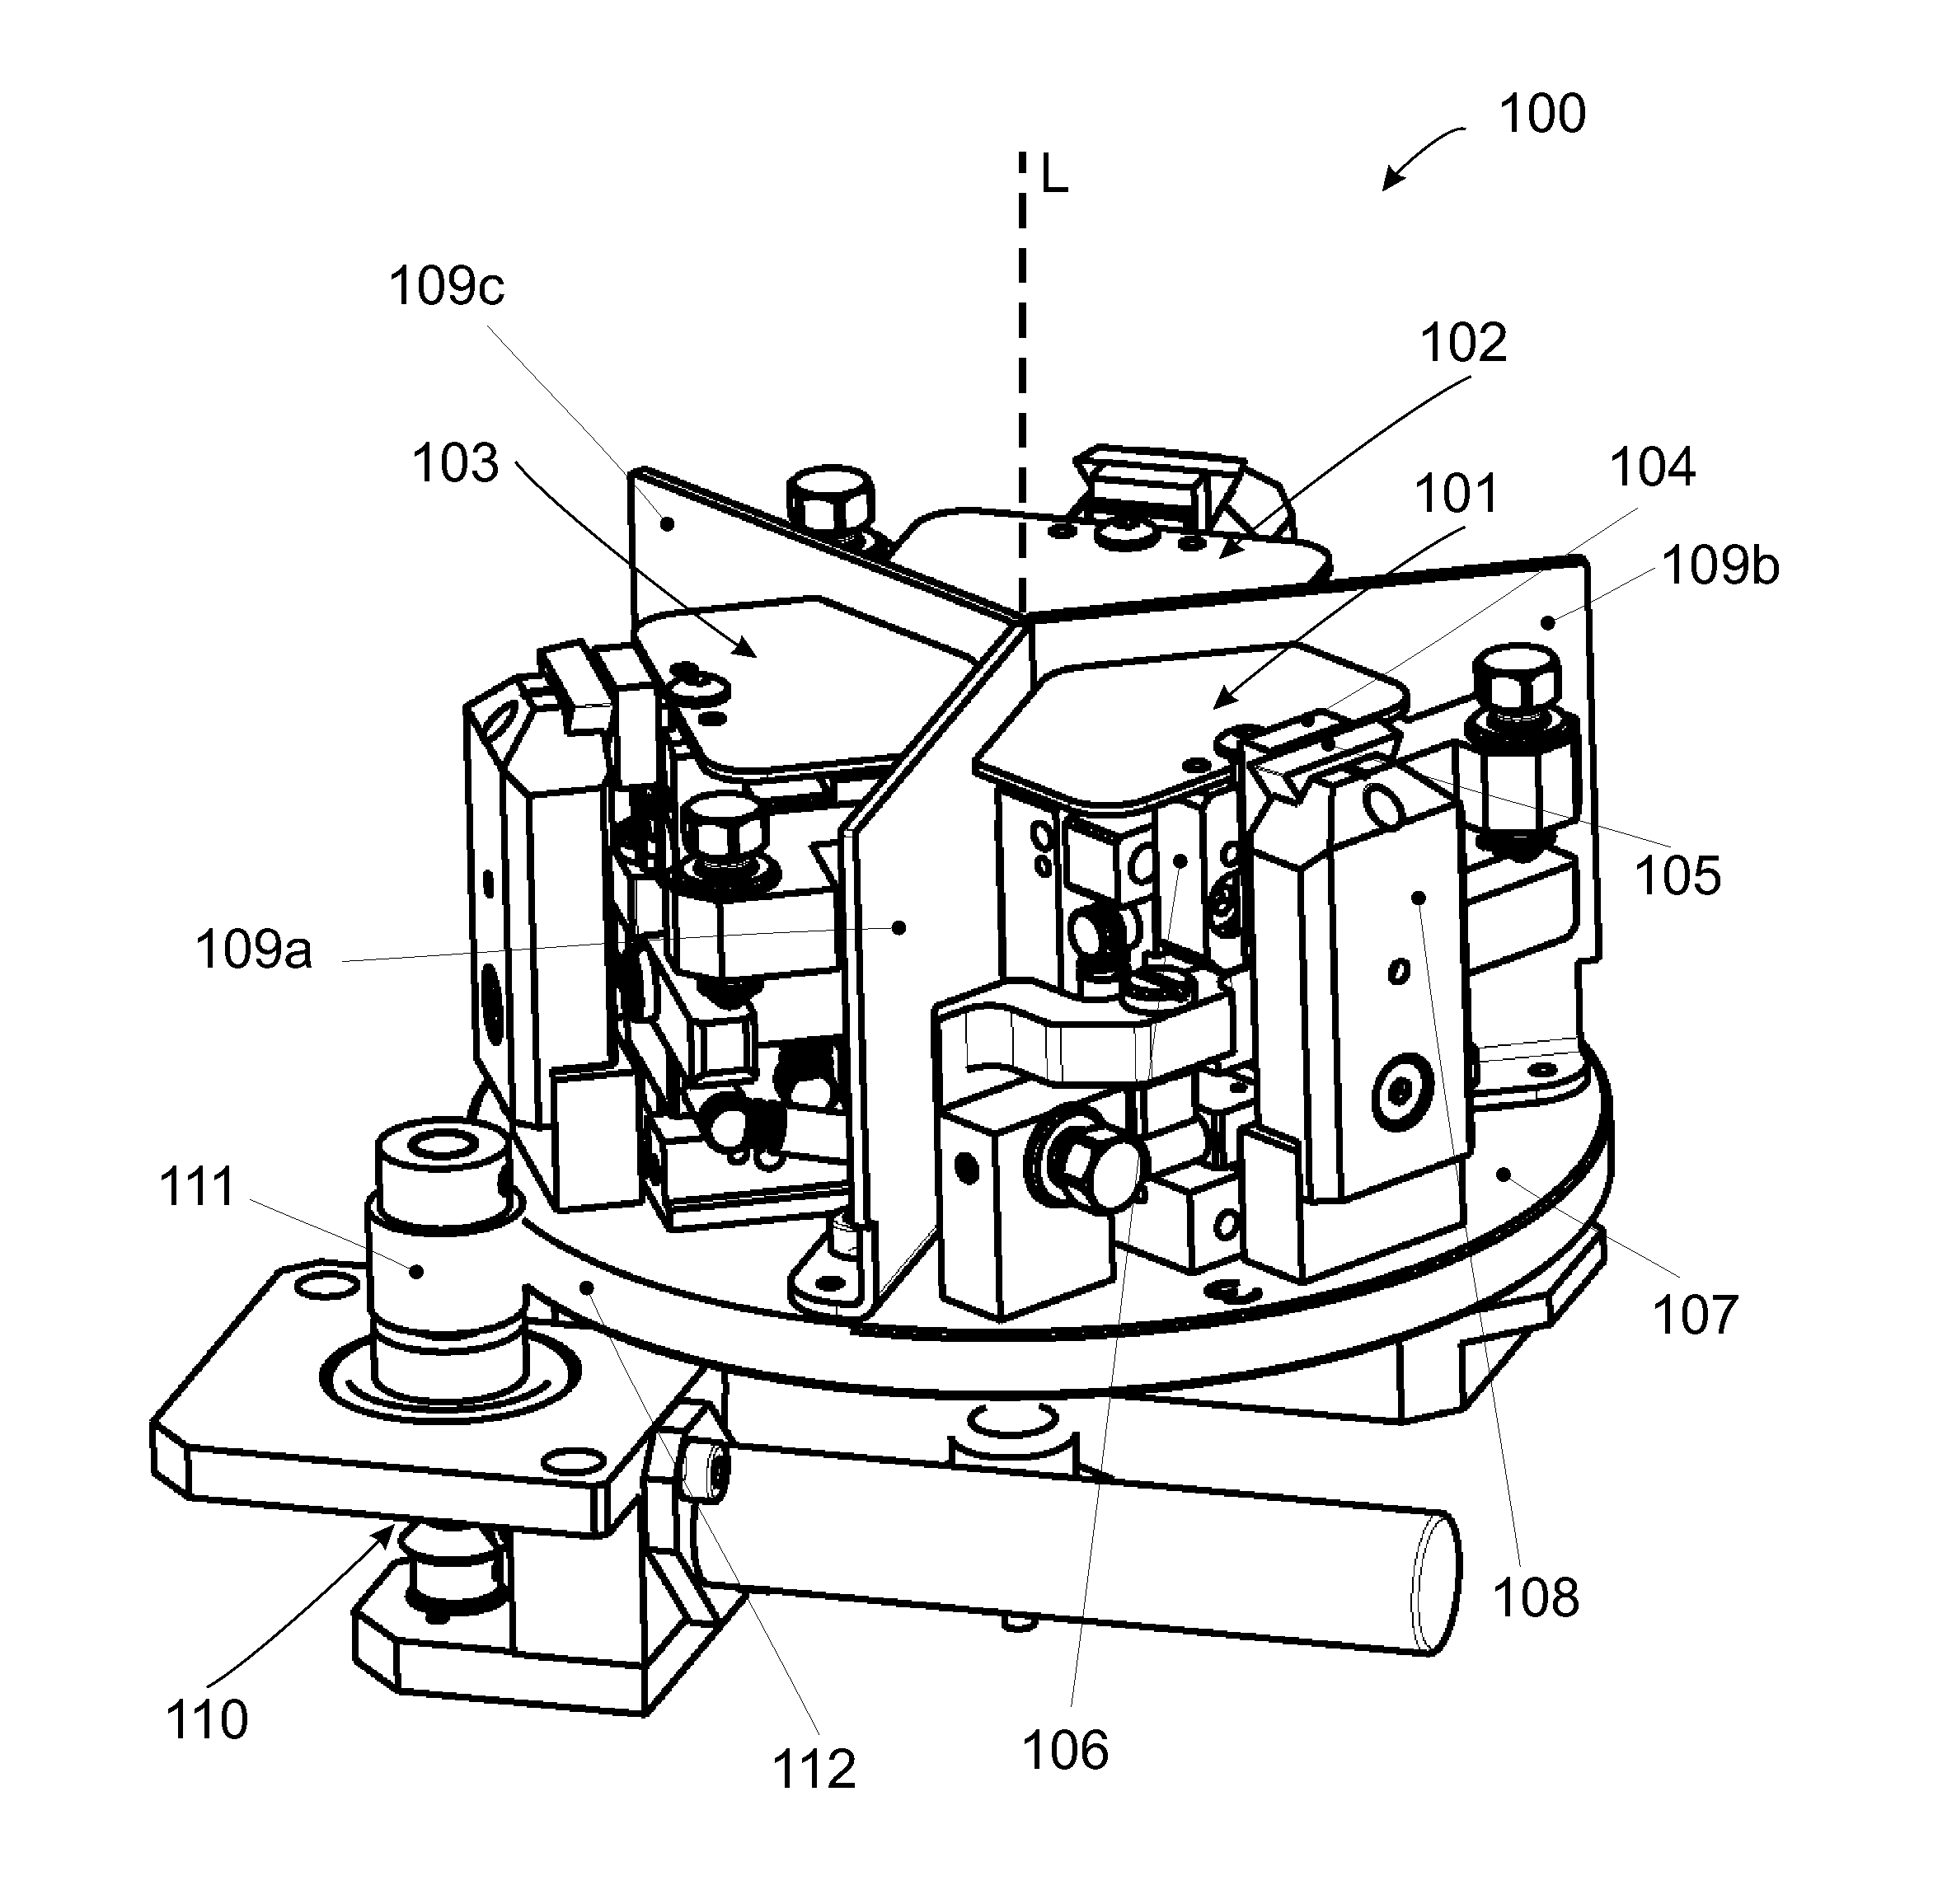 Apparatus and method for sample preparation